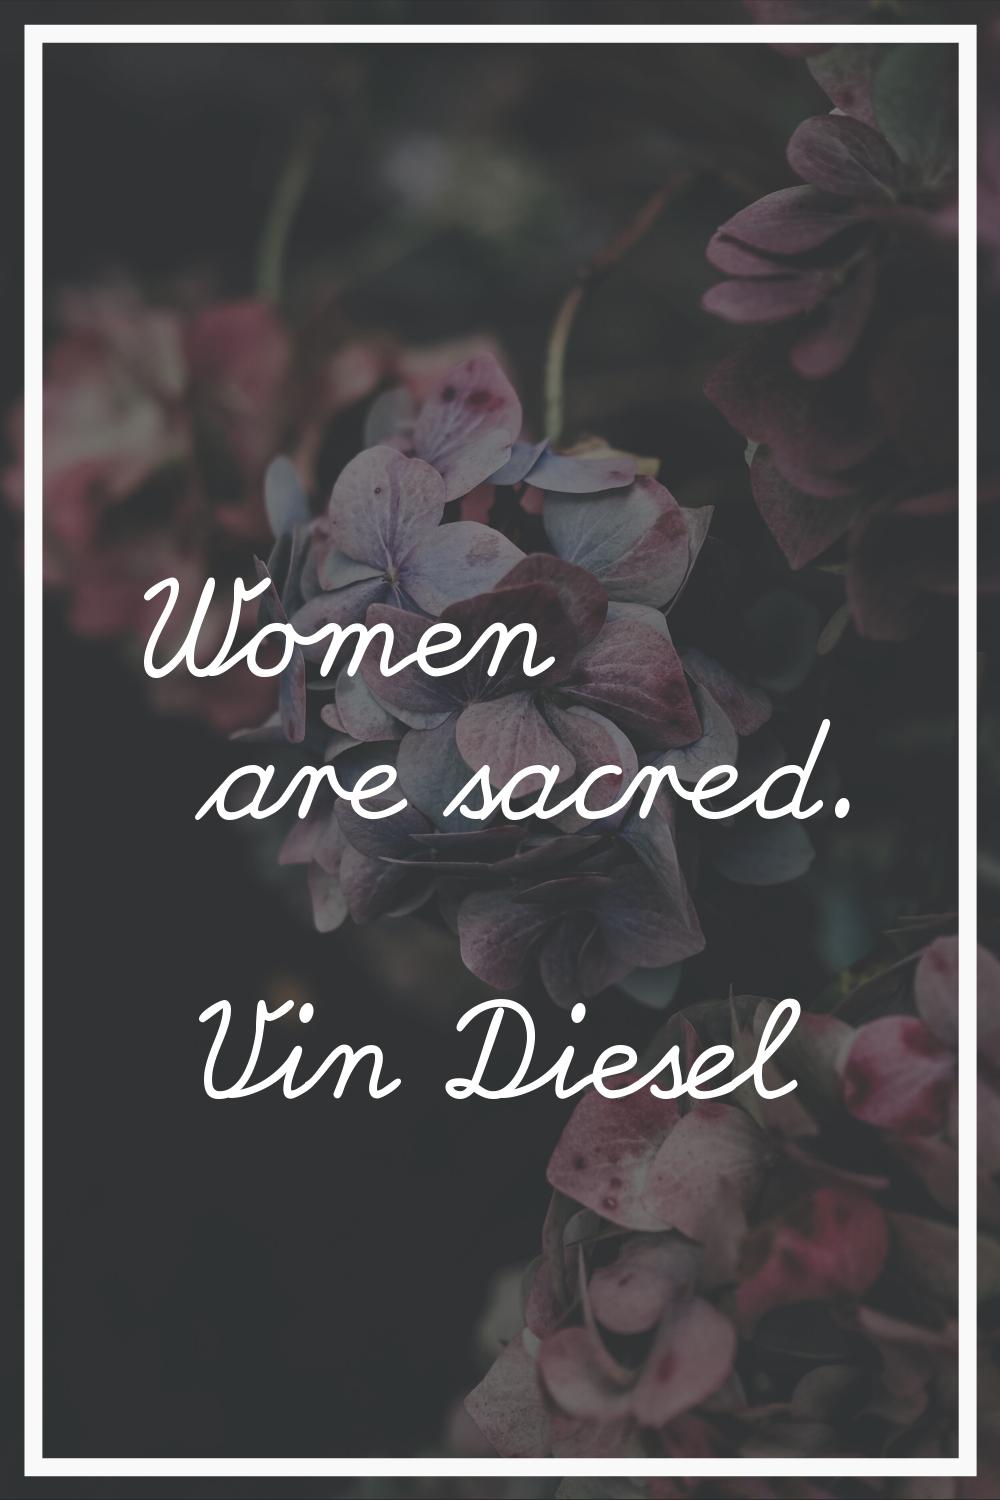 Women are sacred.